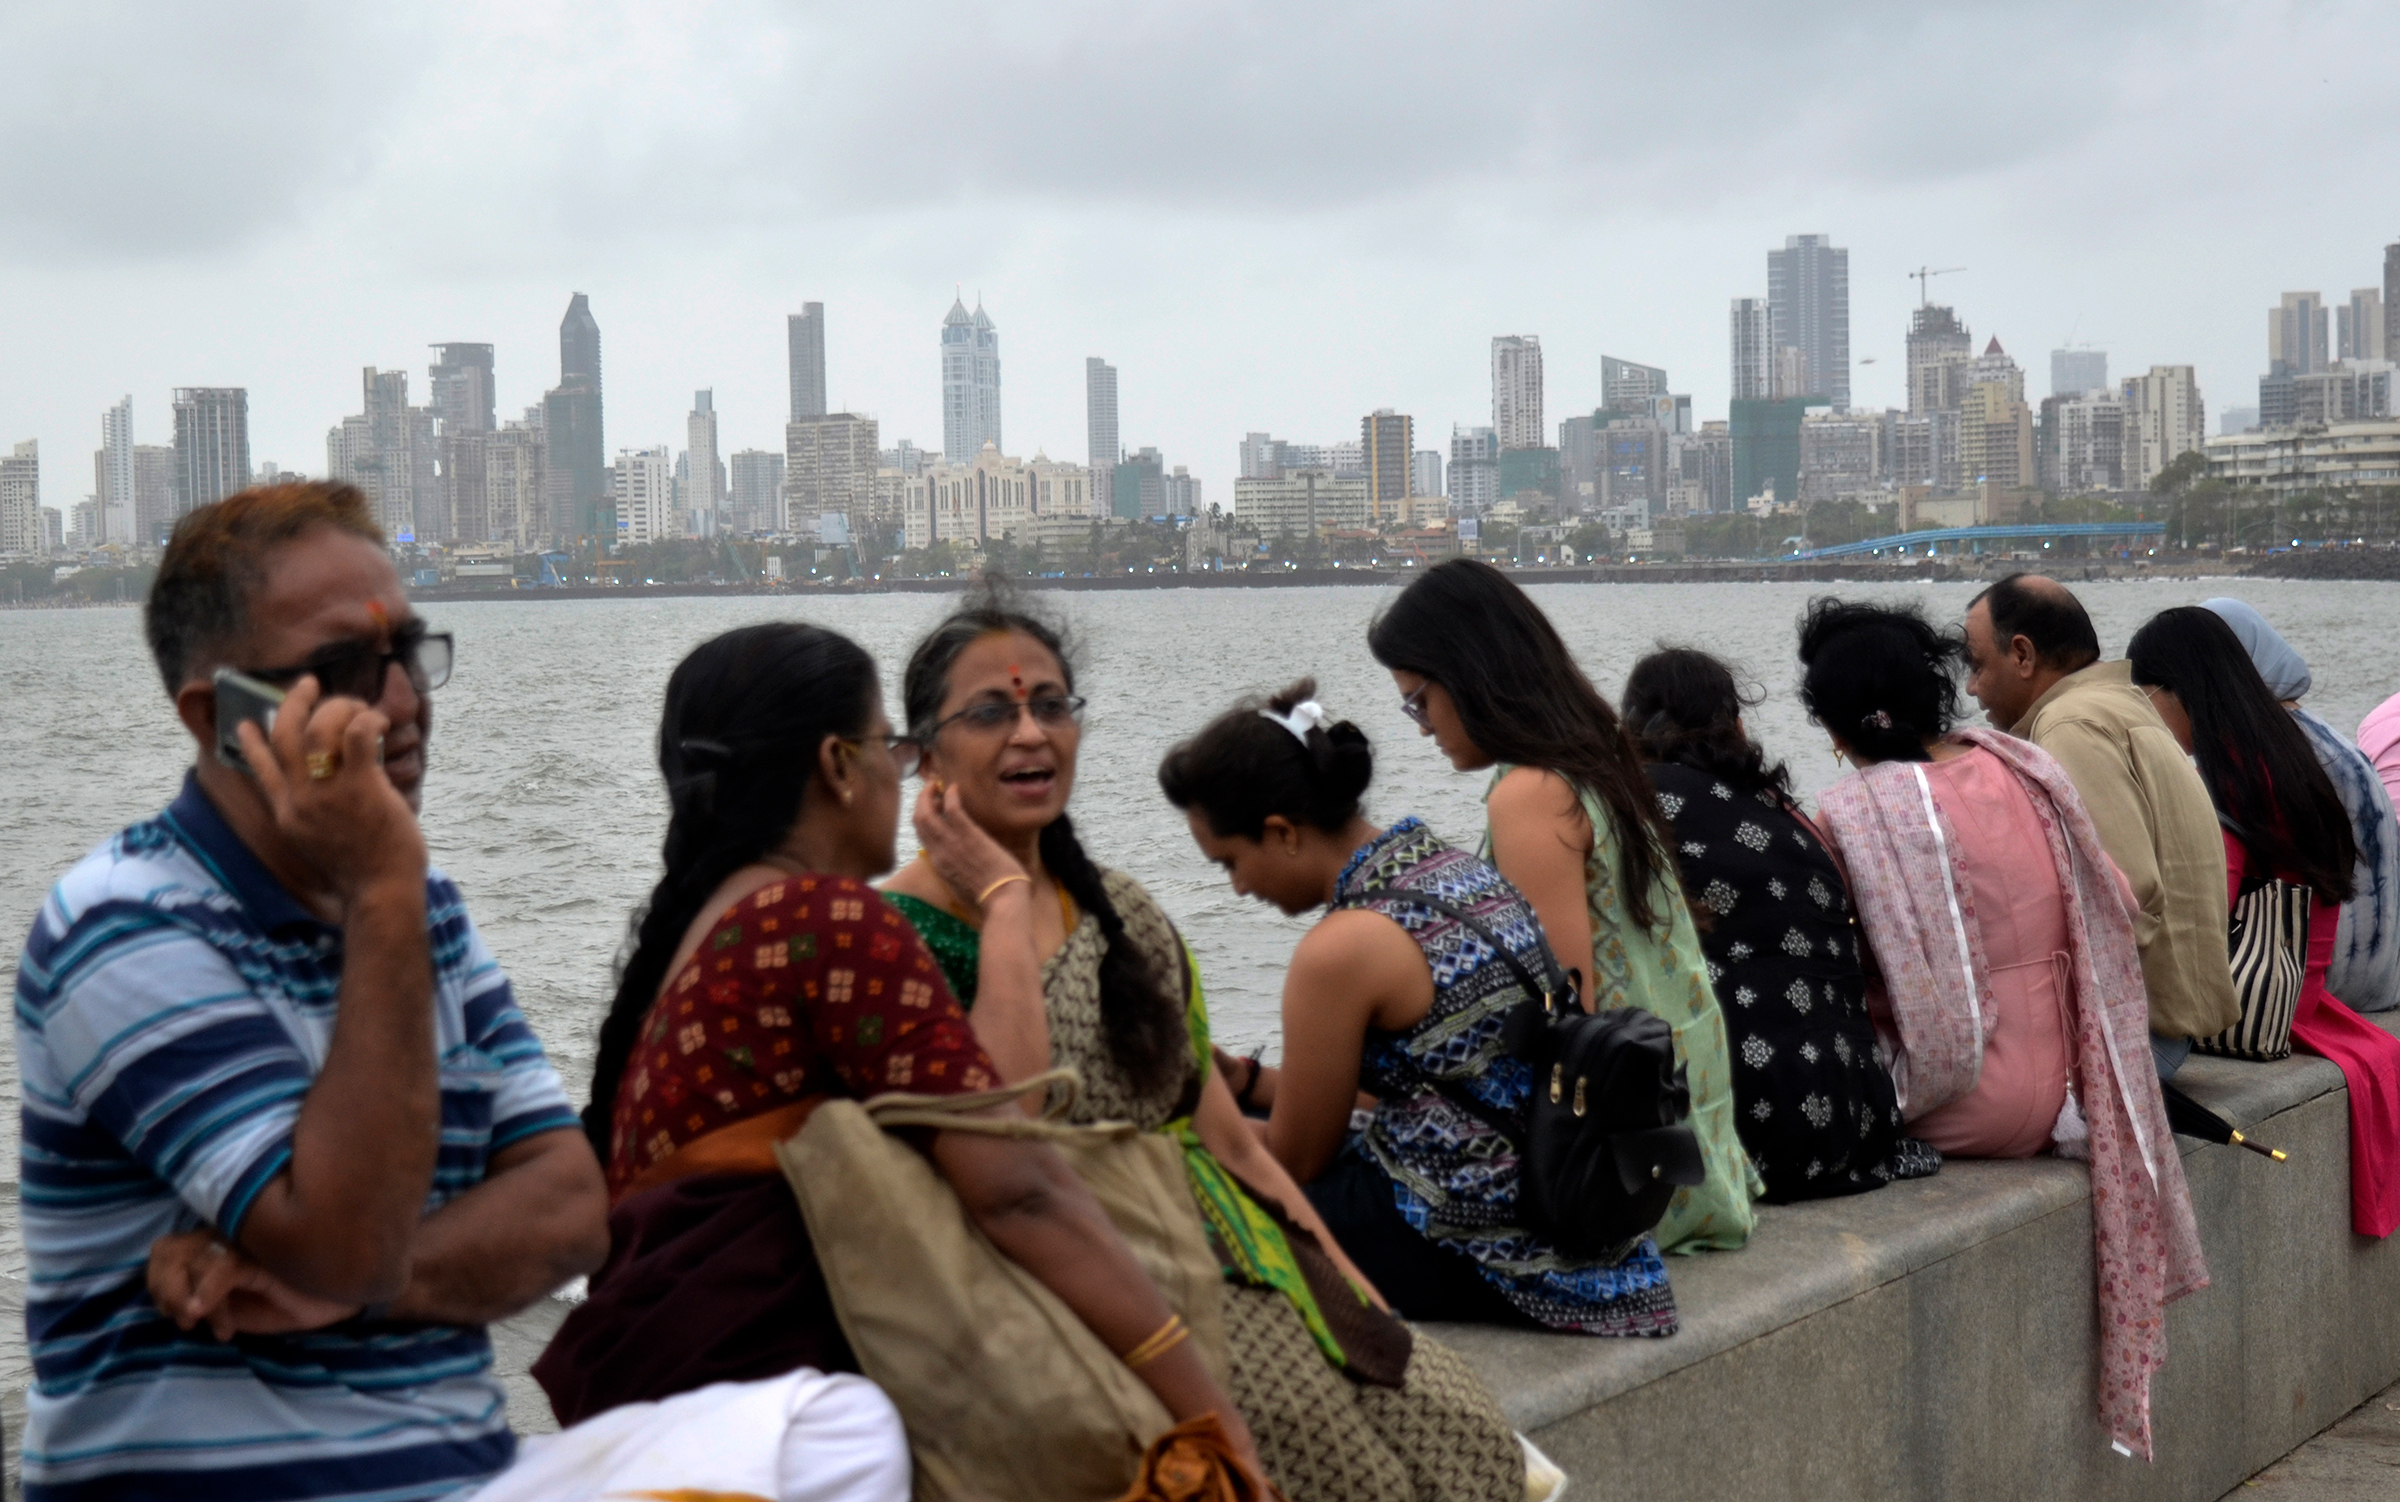 People are seen sitting near marine drive promenade with a cityscape in the background, on the day of World Population Day in Mumbai, India, July 11.